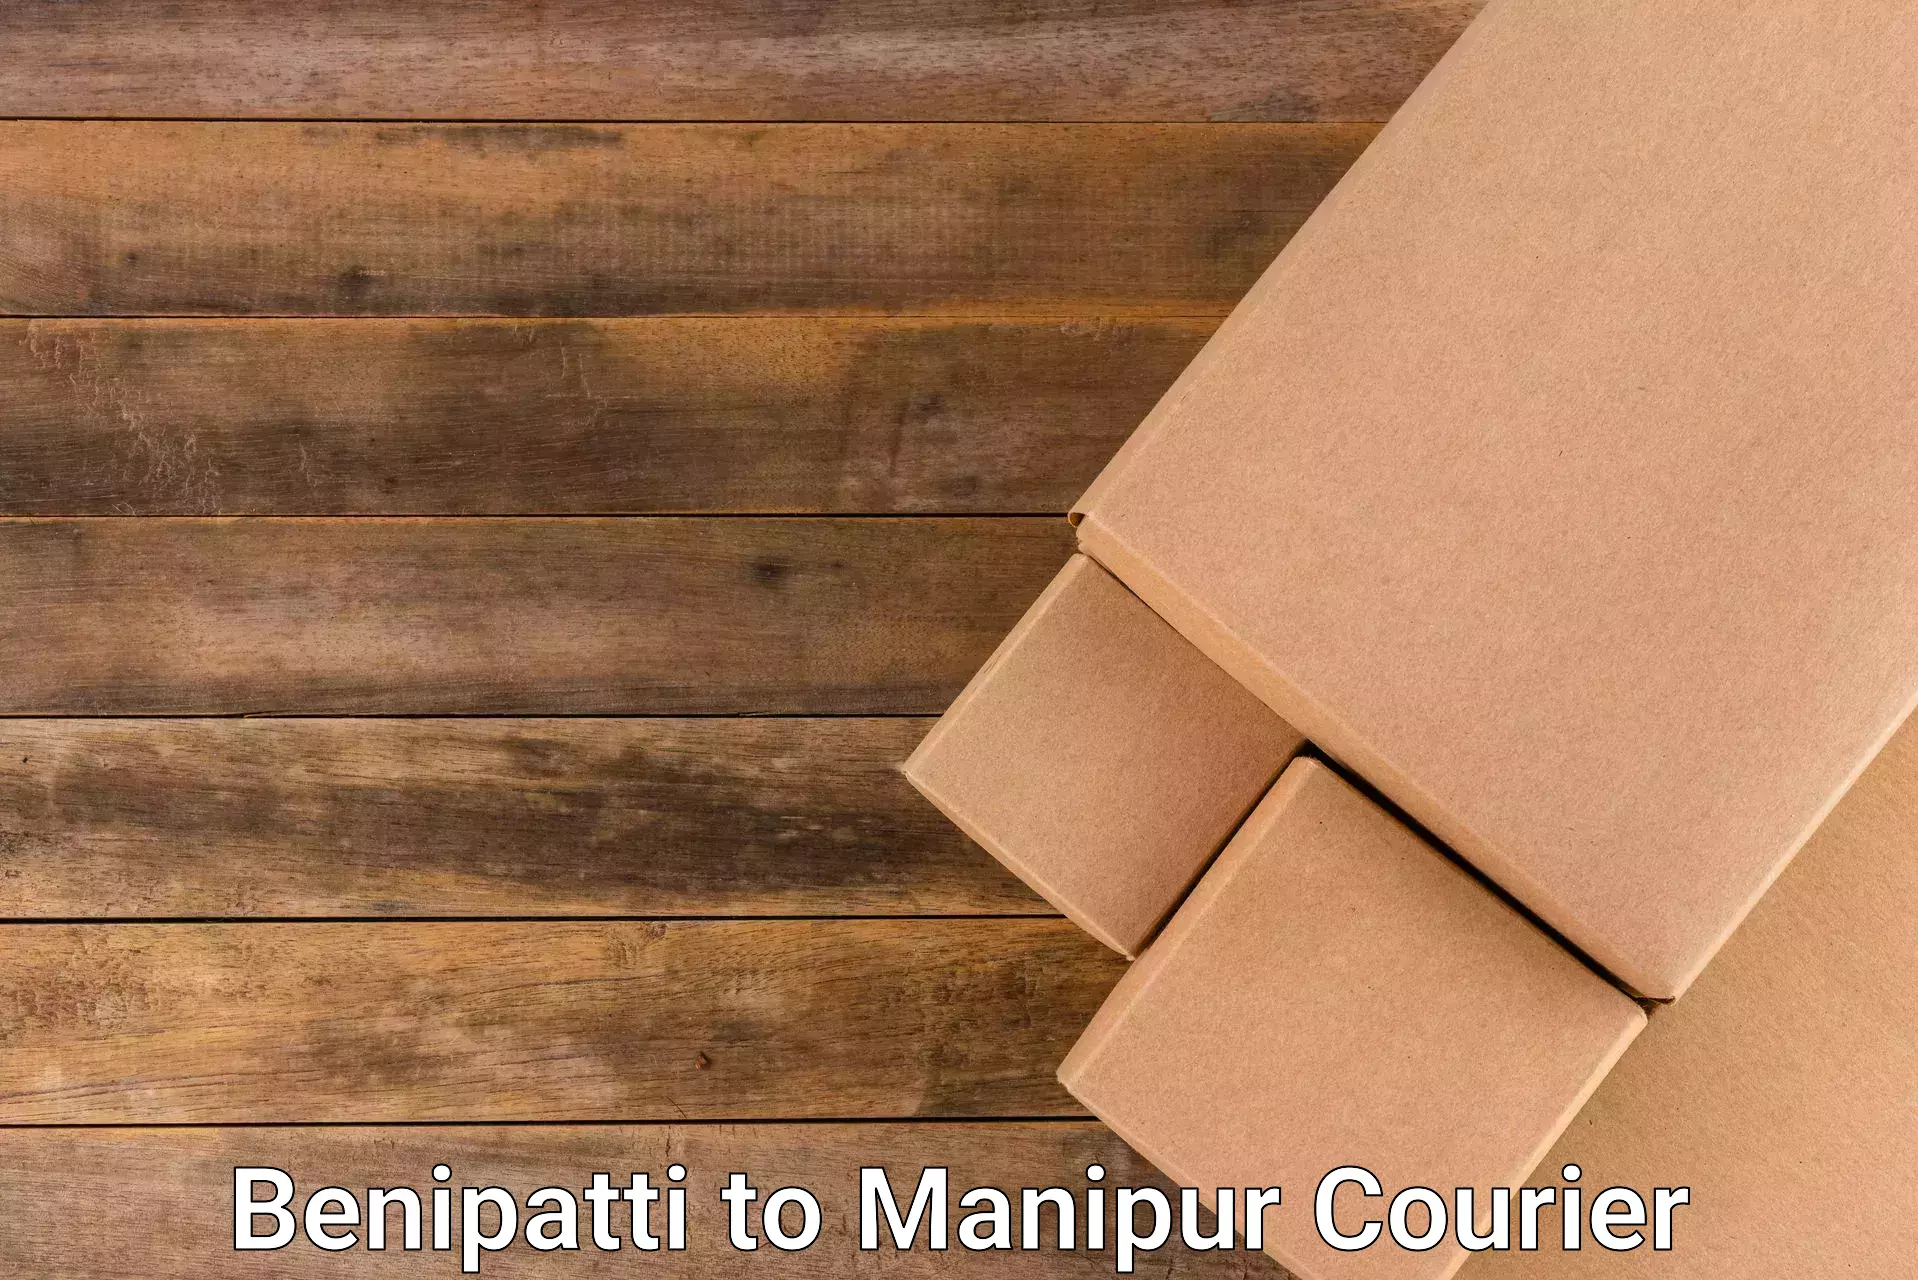 24-hour courier service Benipatti to Chandel